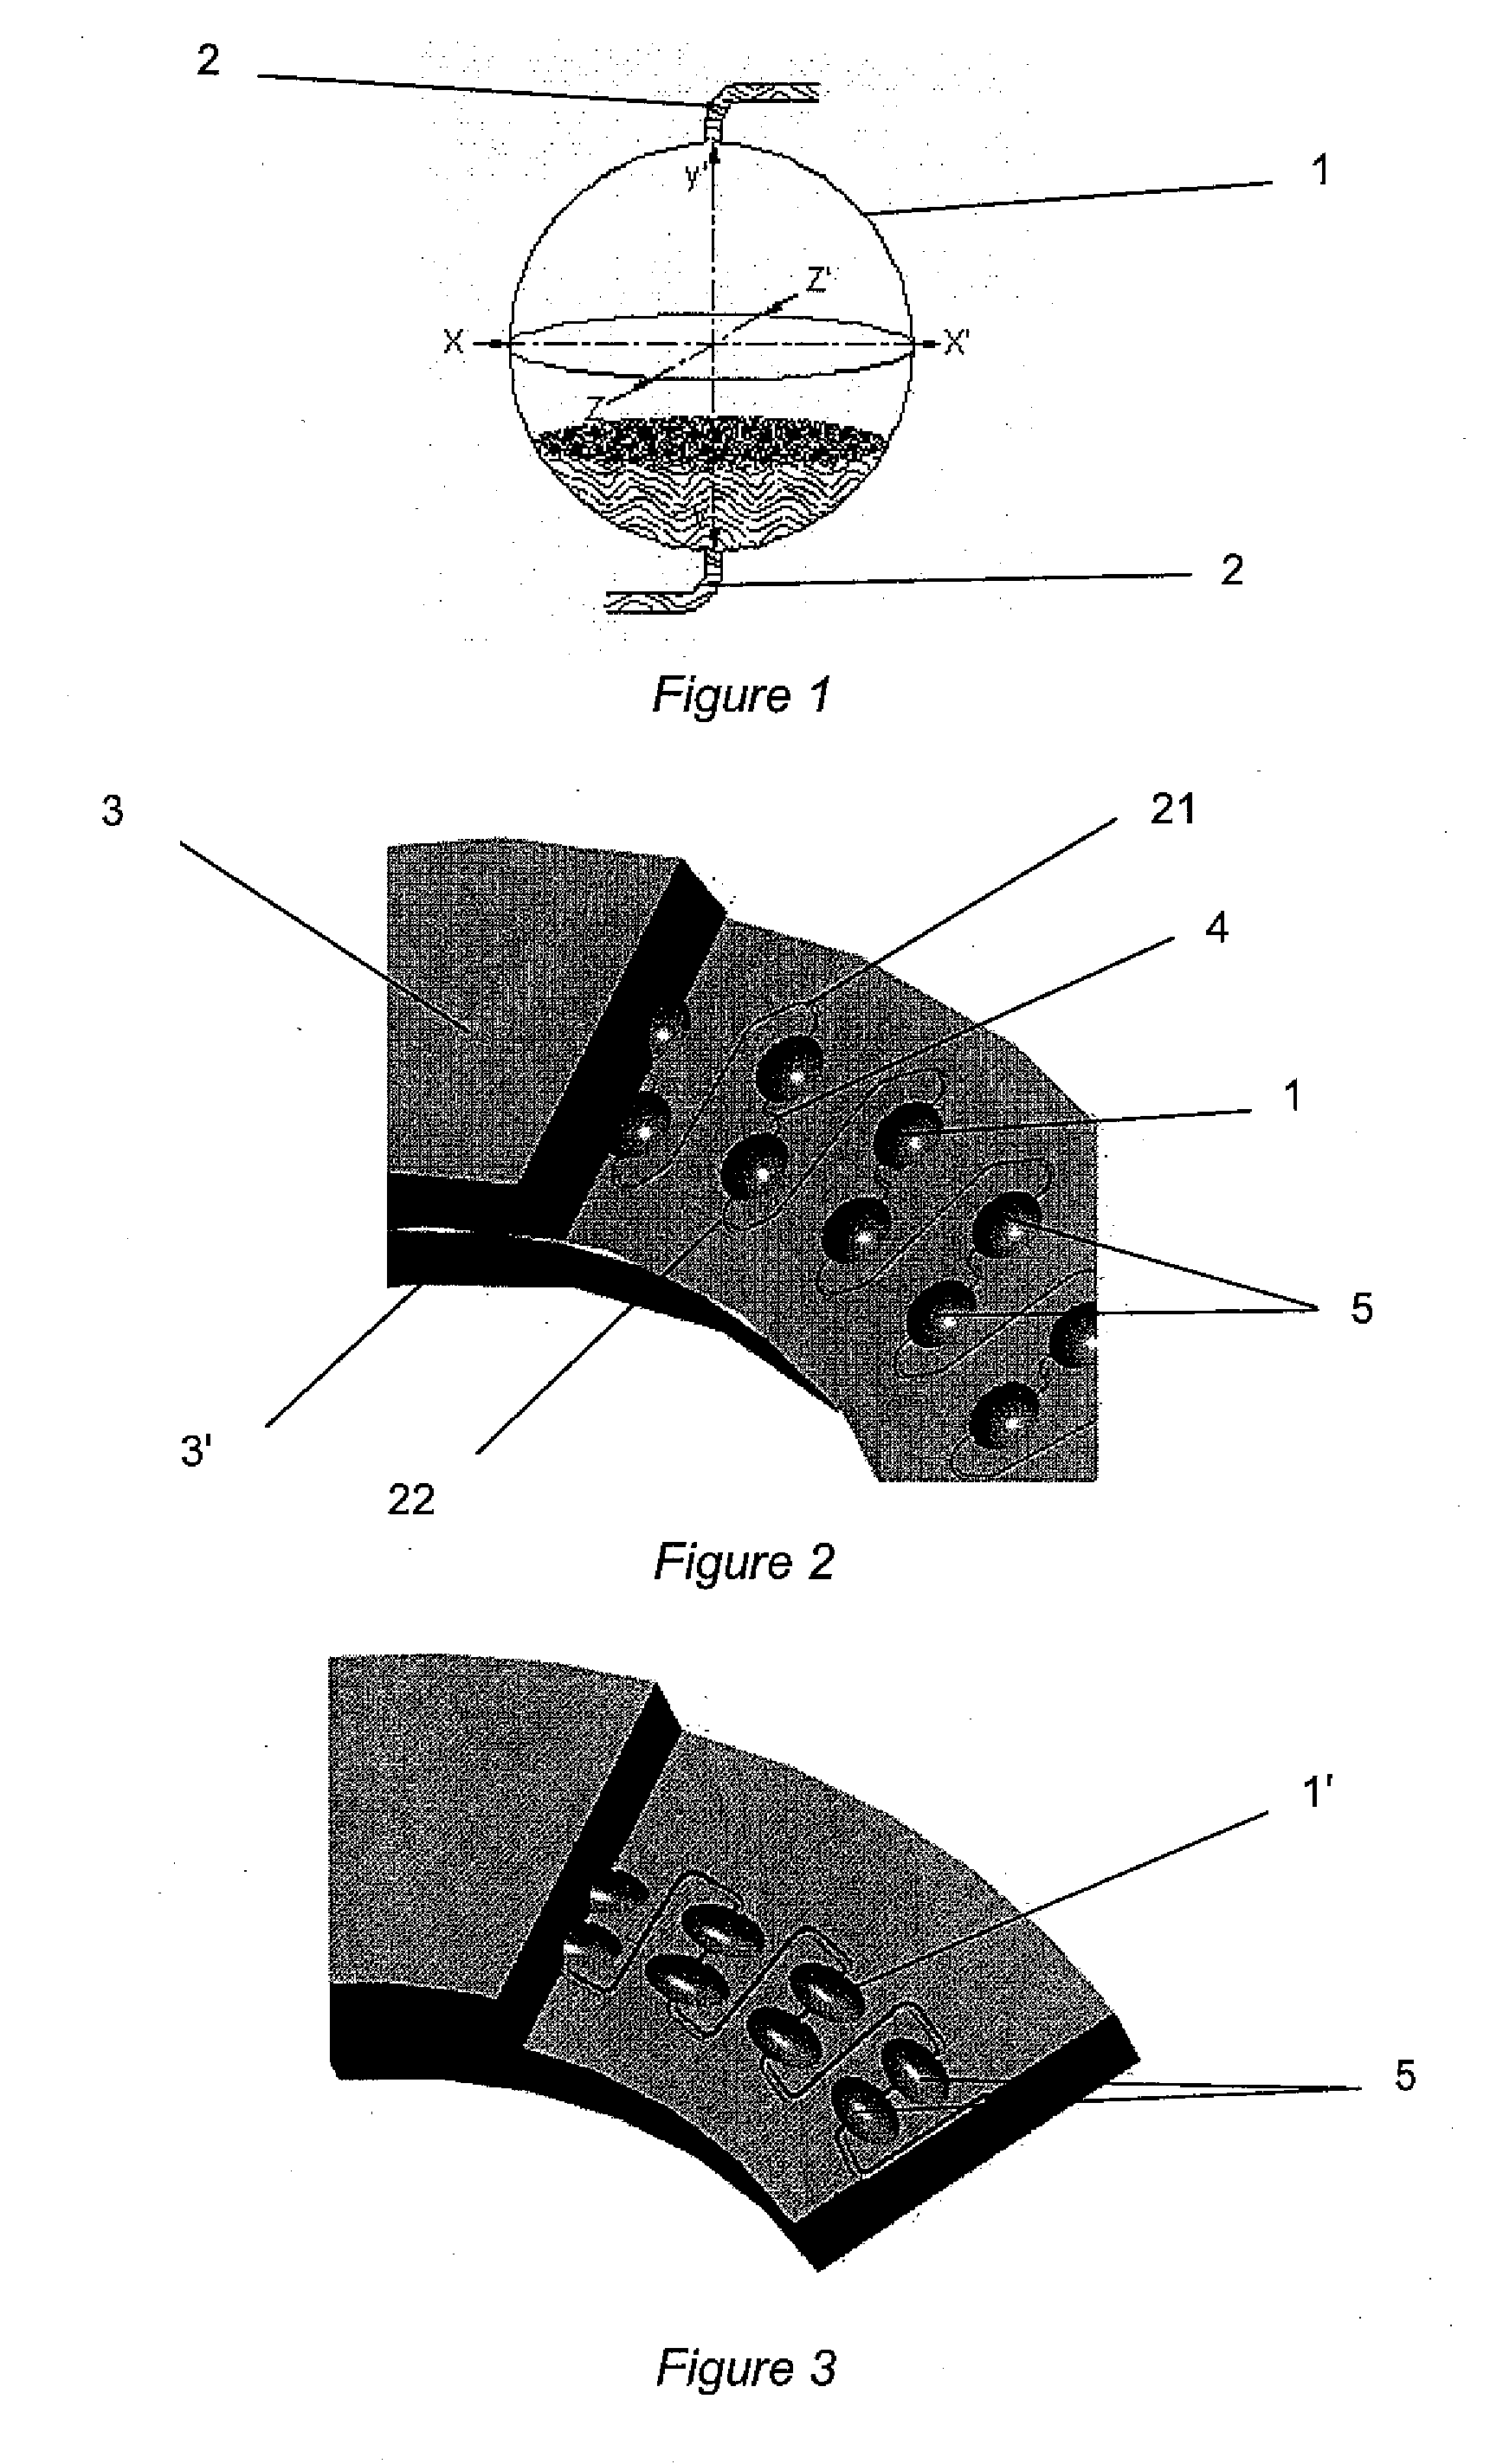 Cells and connecting channels for centrifugal partition chromatography devices